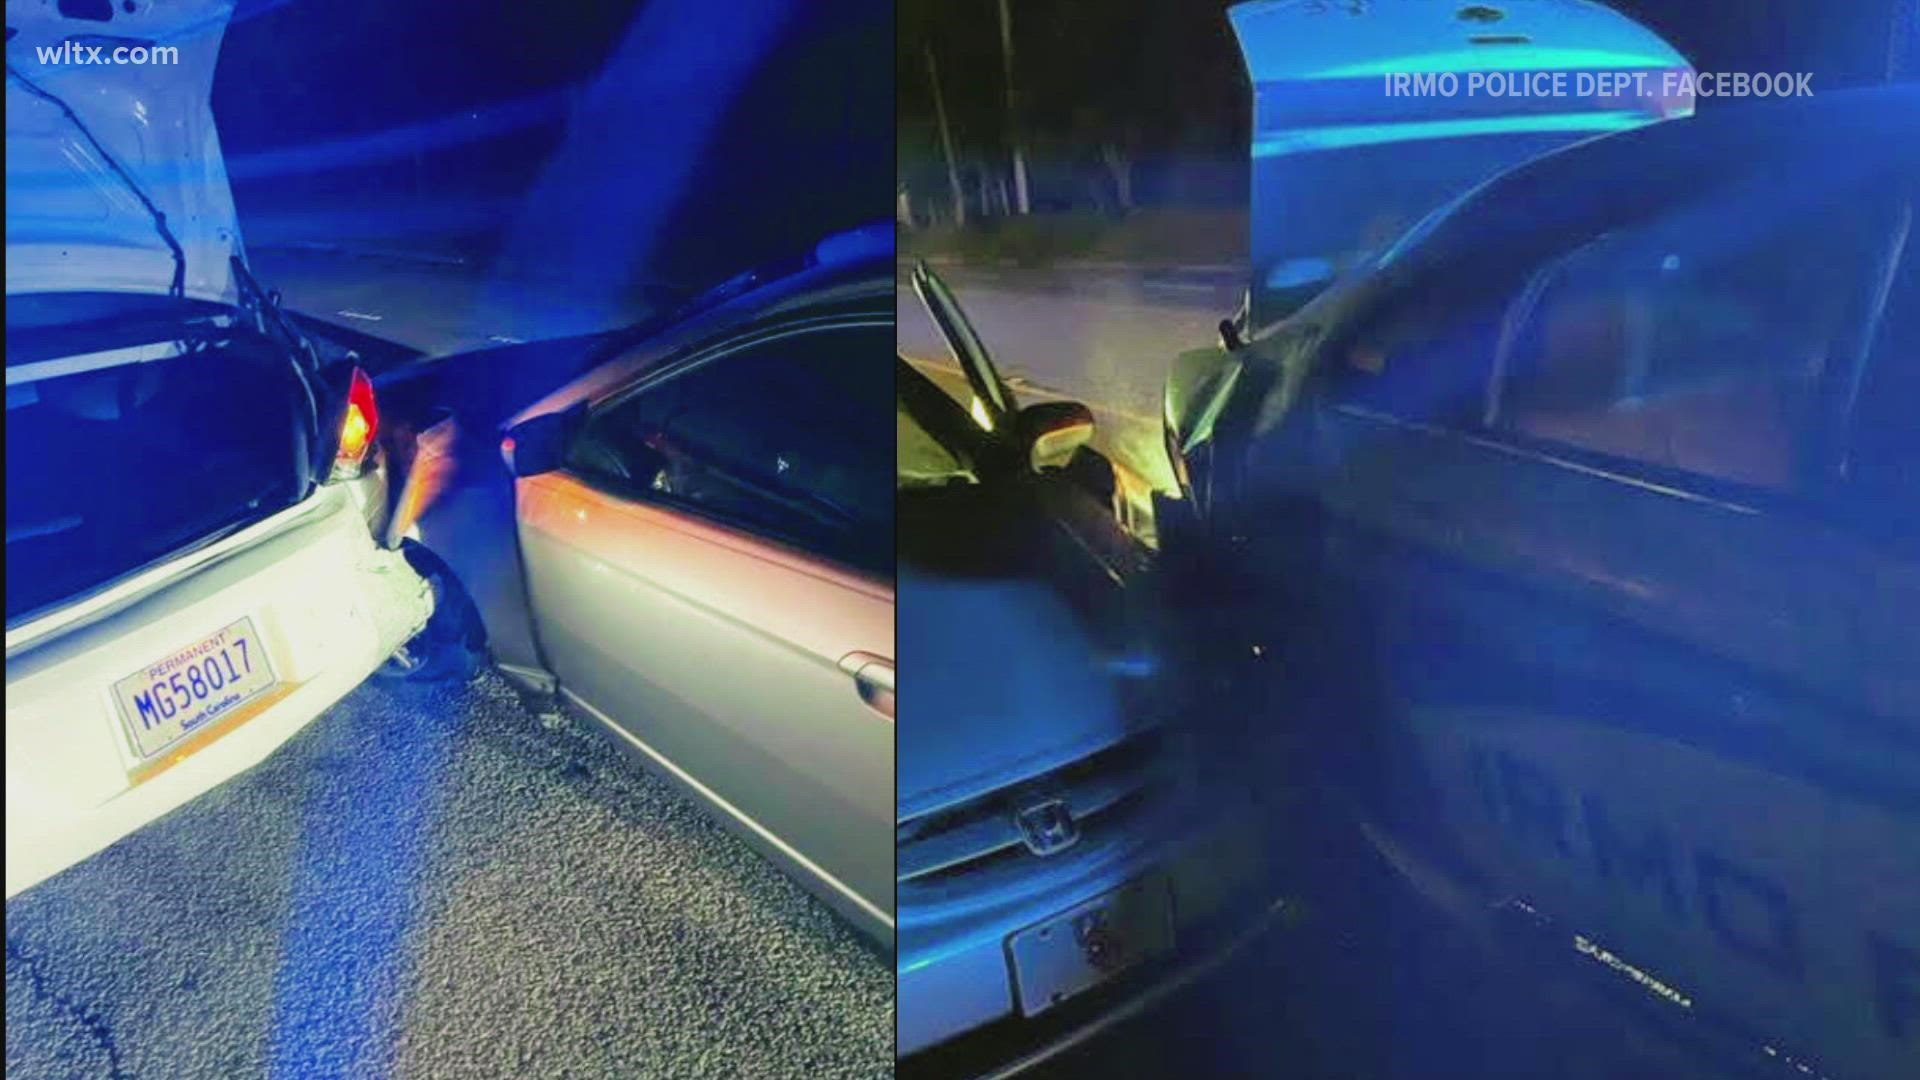 Two Irmo police officers and a stranded motorist were just feet away from a potential tragedy overnight when a suspected DUI driver came crashing through.